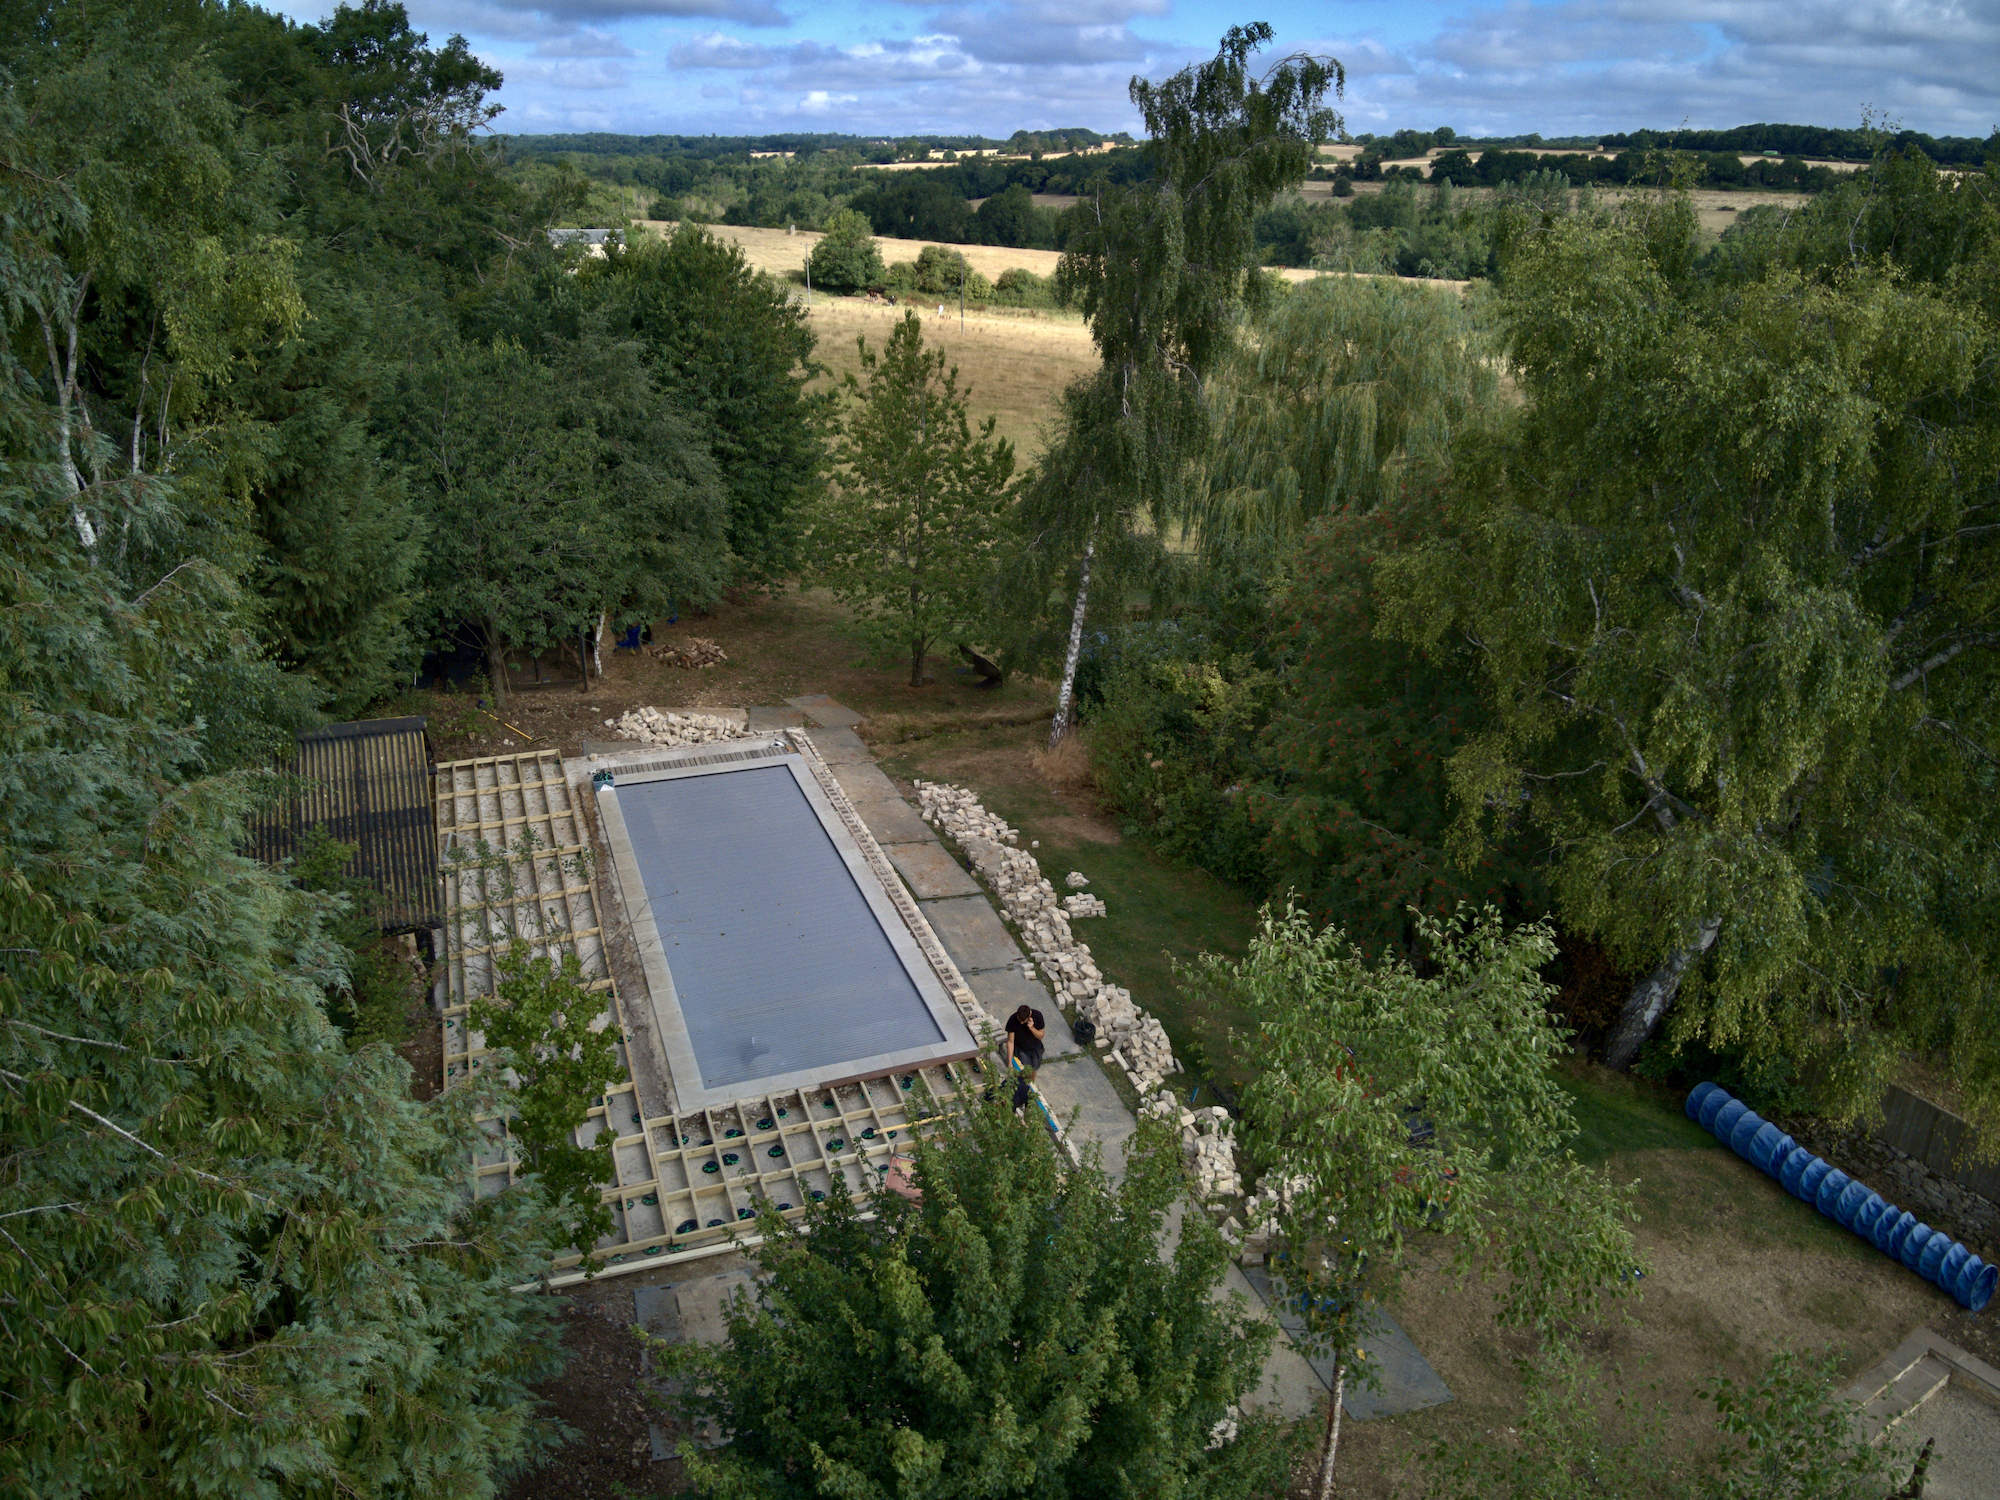 Ariel shot from above the trees in Oxfordshire countryside 